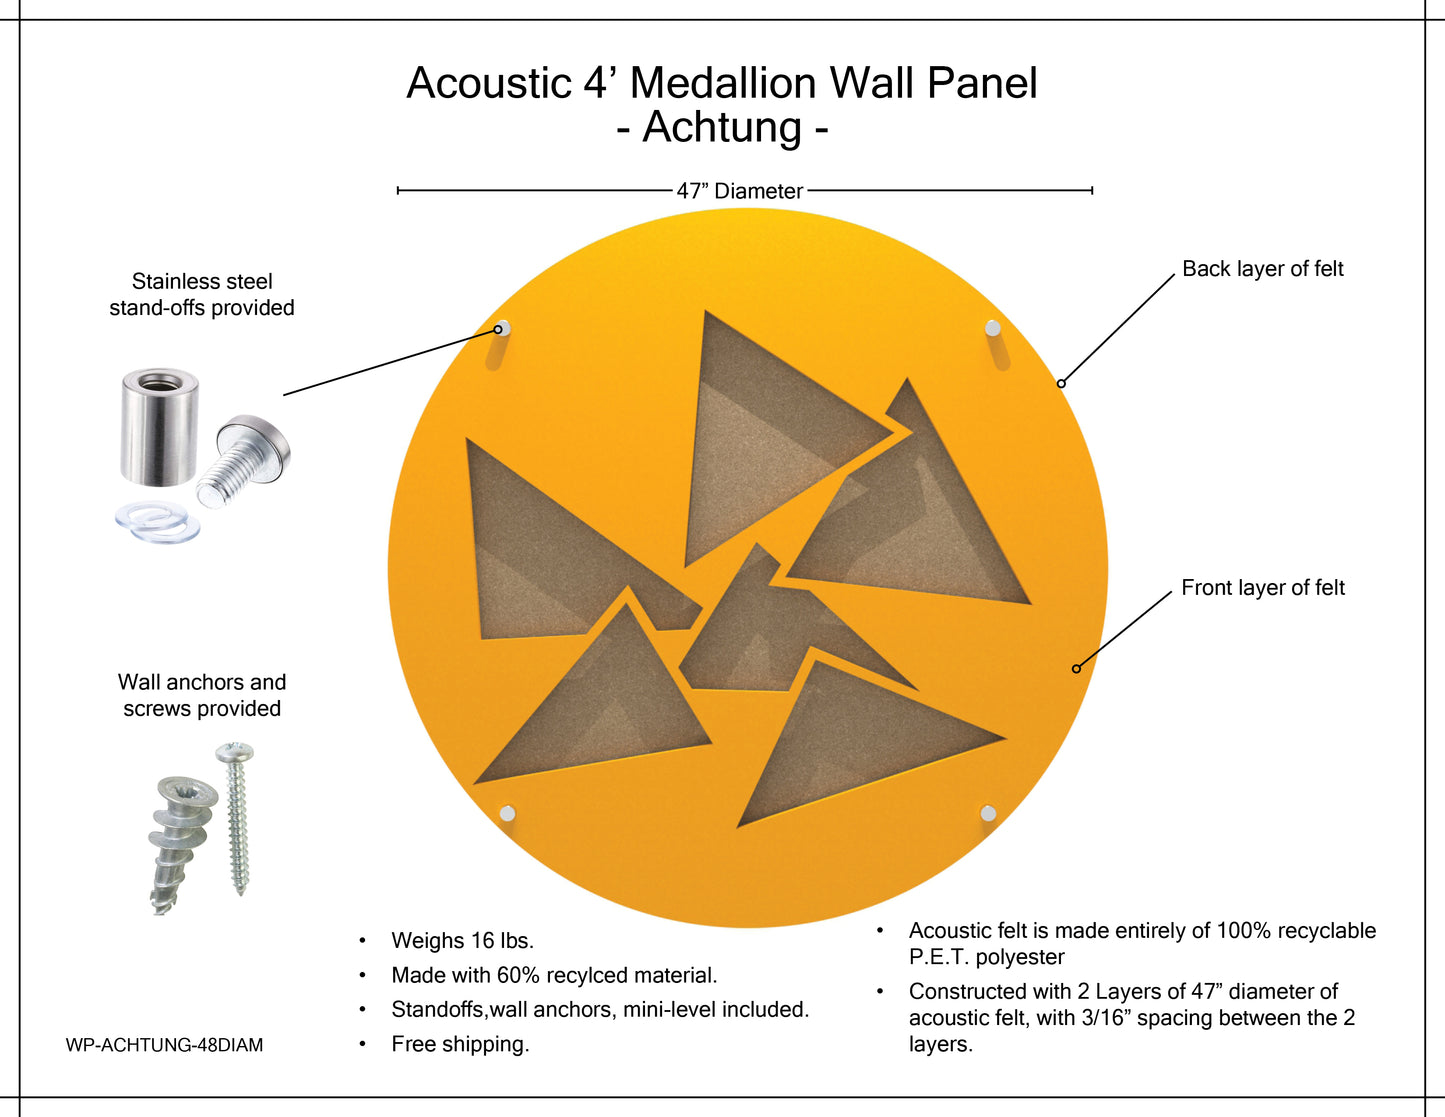 Medallion Acoustic Wall Panel - Achtung